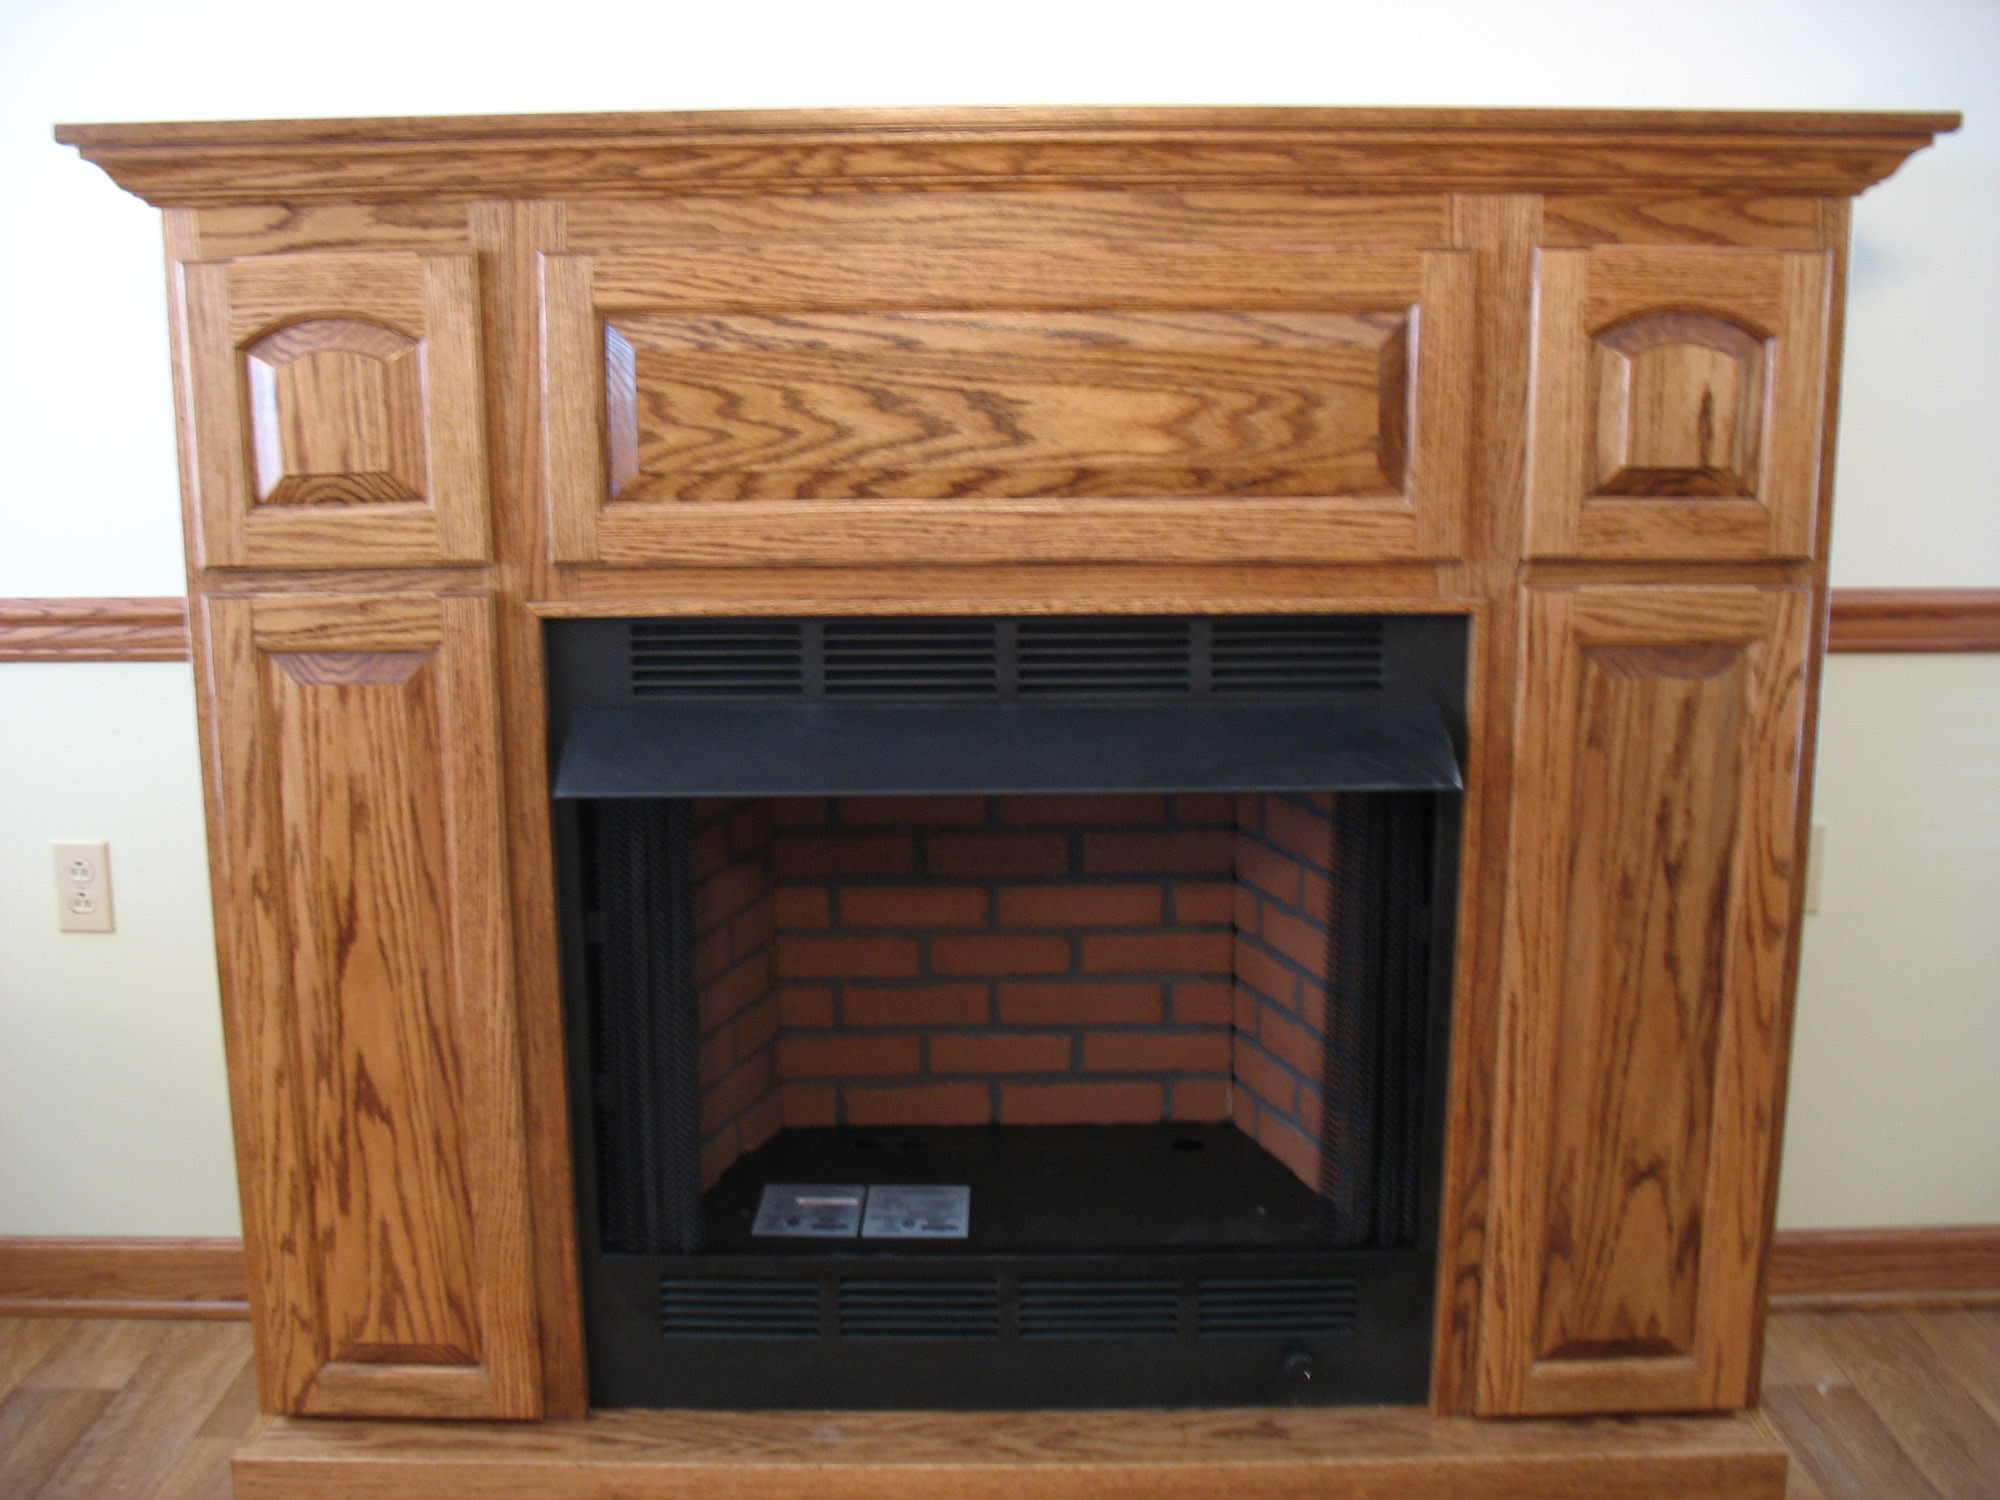 DIY Wood Fireplace Surround
 Give a Makeover to Your Fireplace with a DIY Fireplace